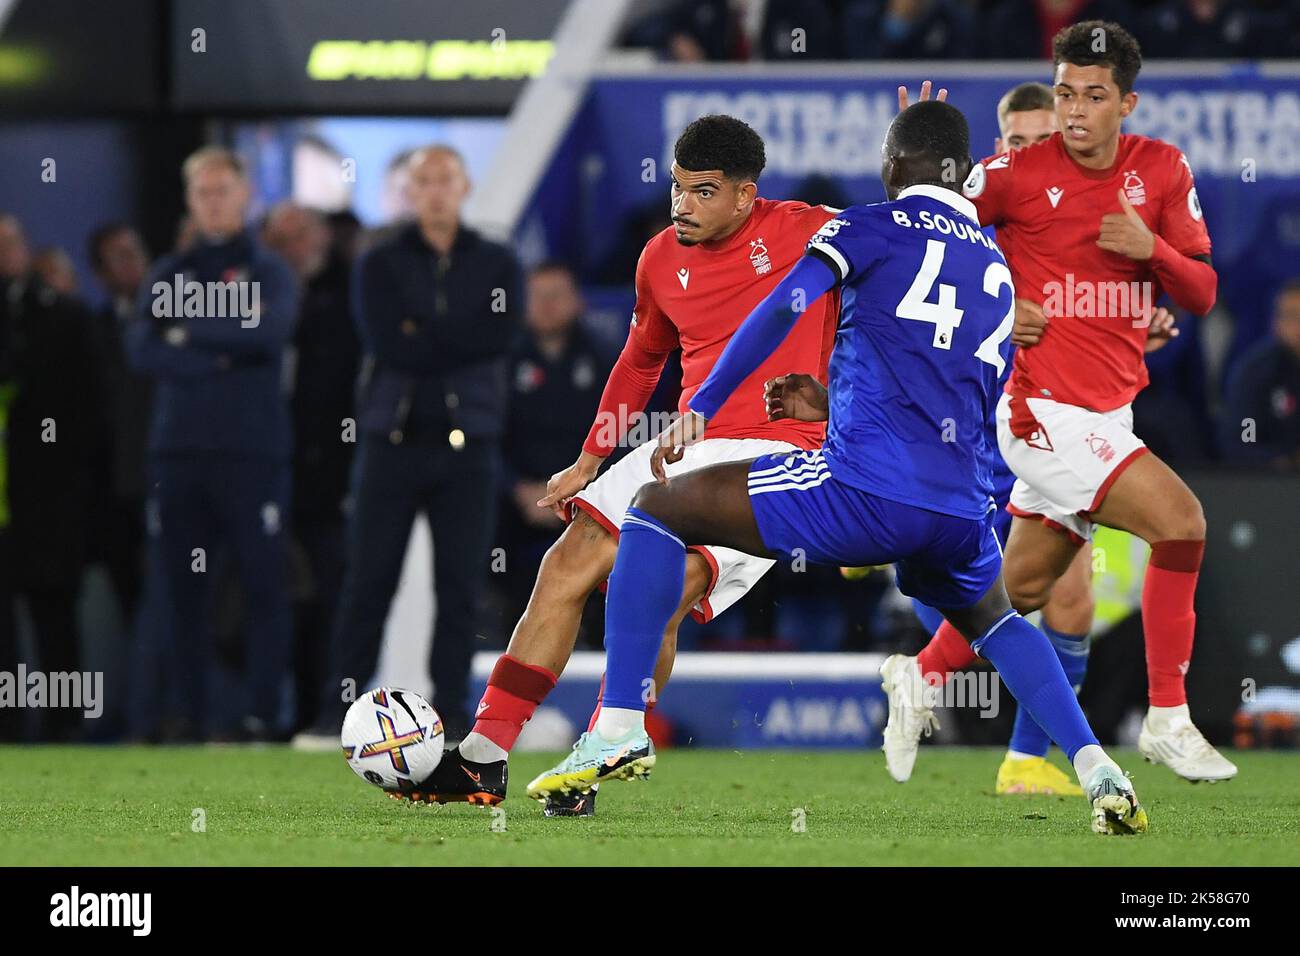 Morgan Gibbs-White of Nottingham Forest under pressure from Boubakary Soumare of Leicester City during the Premier League match between Leicester City and Nottingham Forest at the King Power Stadium, Leicester on Monday 3rd October 2022. (Credit: Jon Hobley | MI News) Credit: MI News & Sport /Alamy Live News Stock Photo